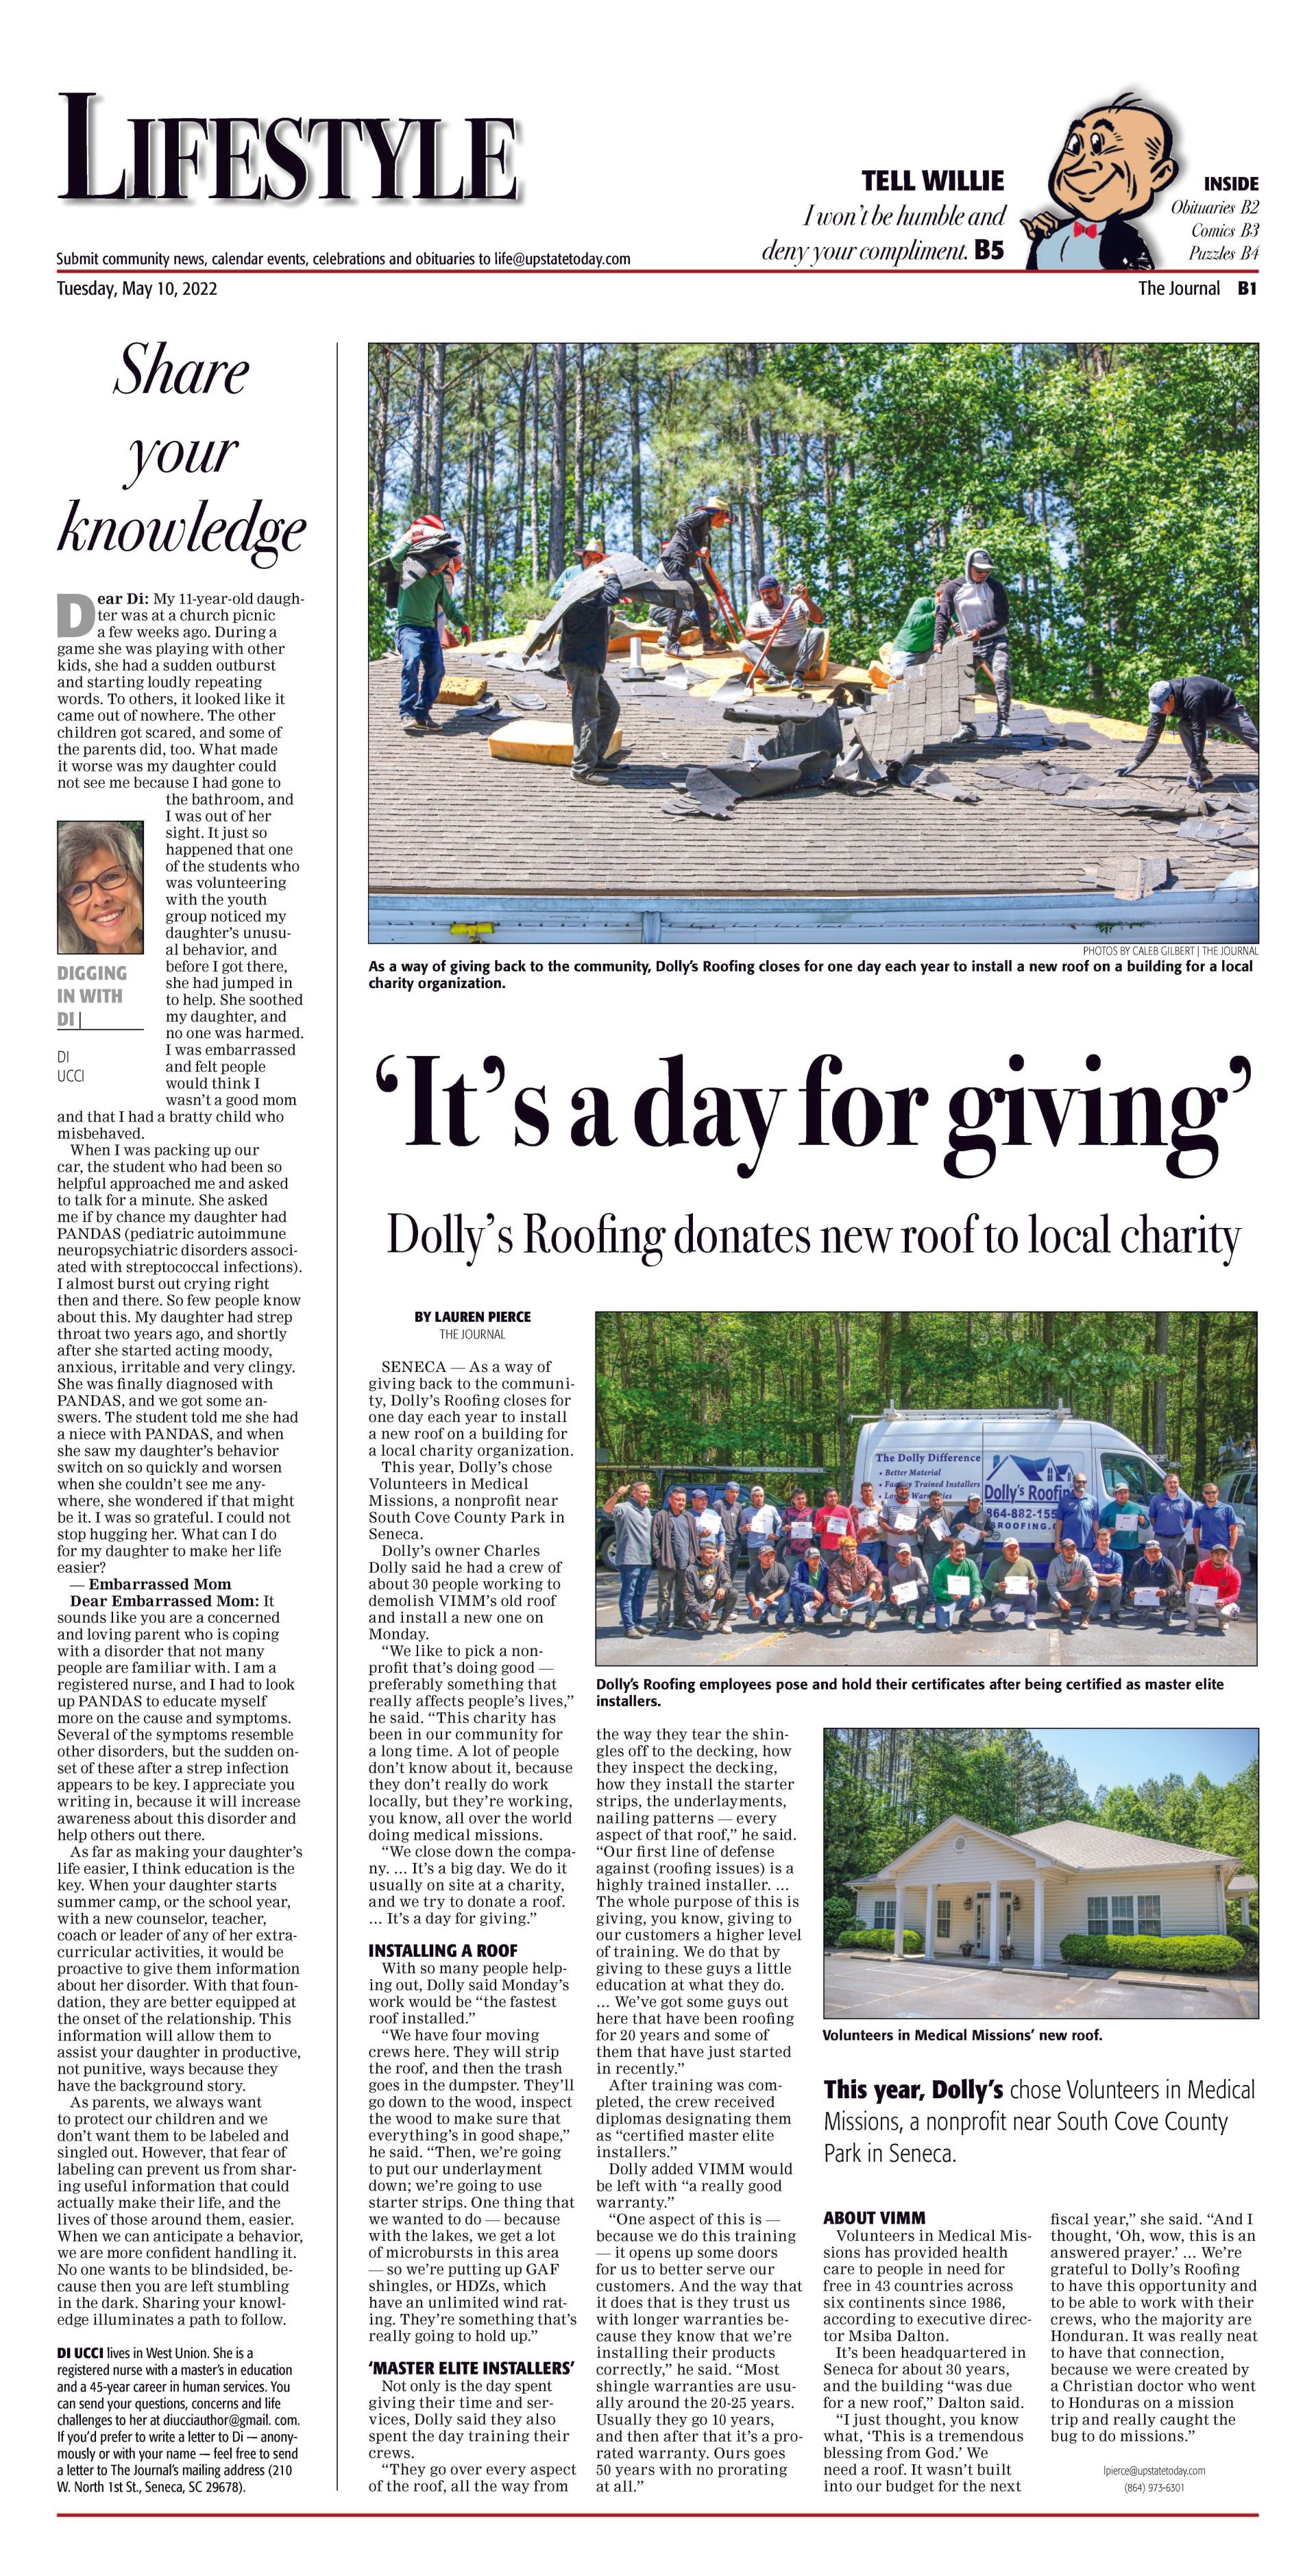 dolly's roofing day for giving